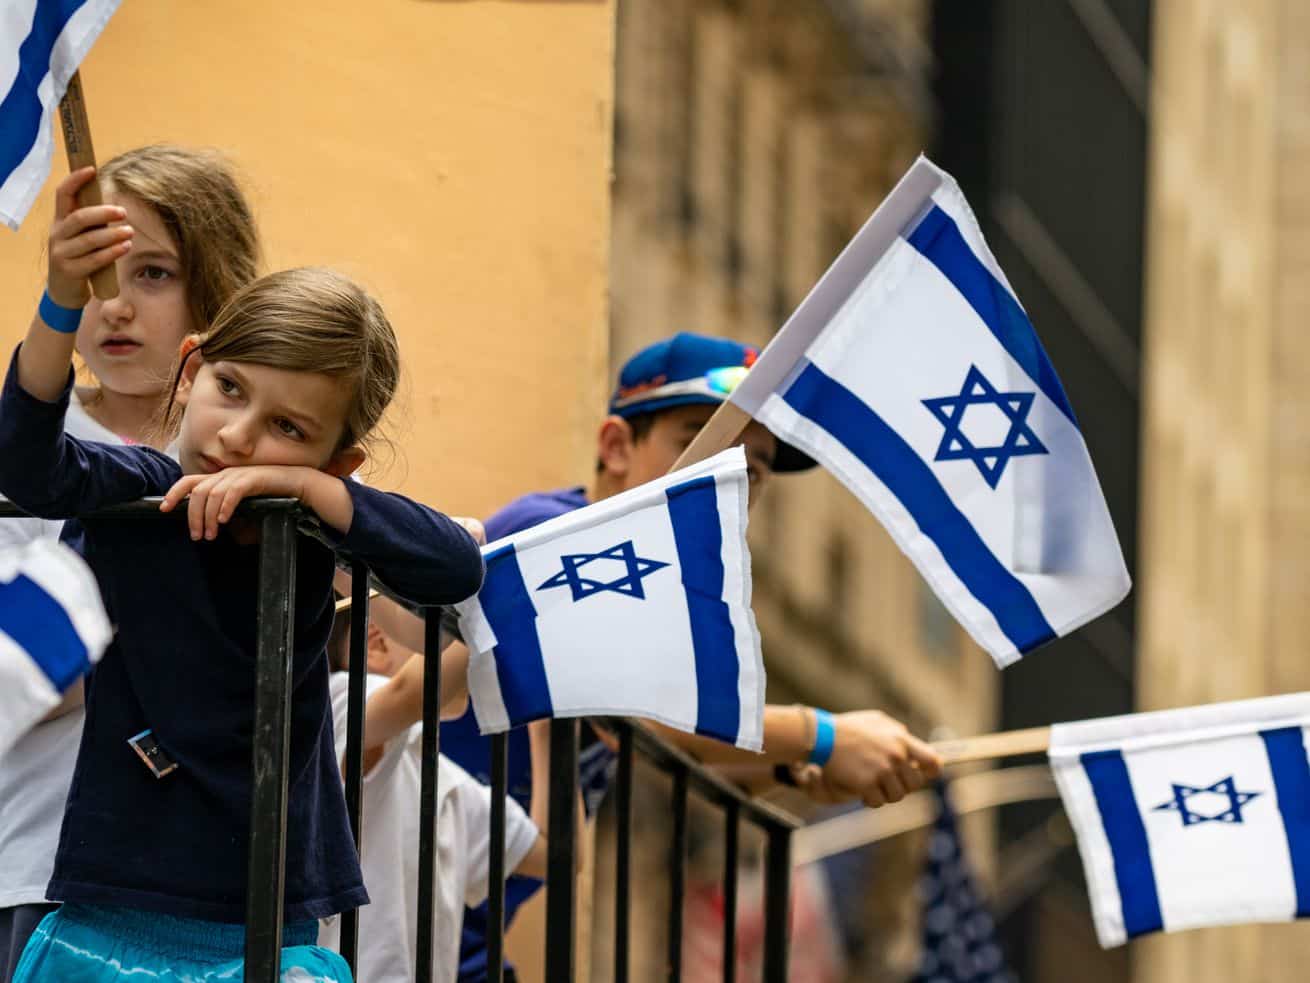 American Jews are taught a very specific Israel narrative. Can that change?